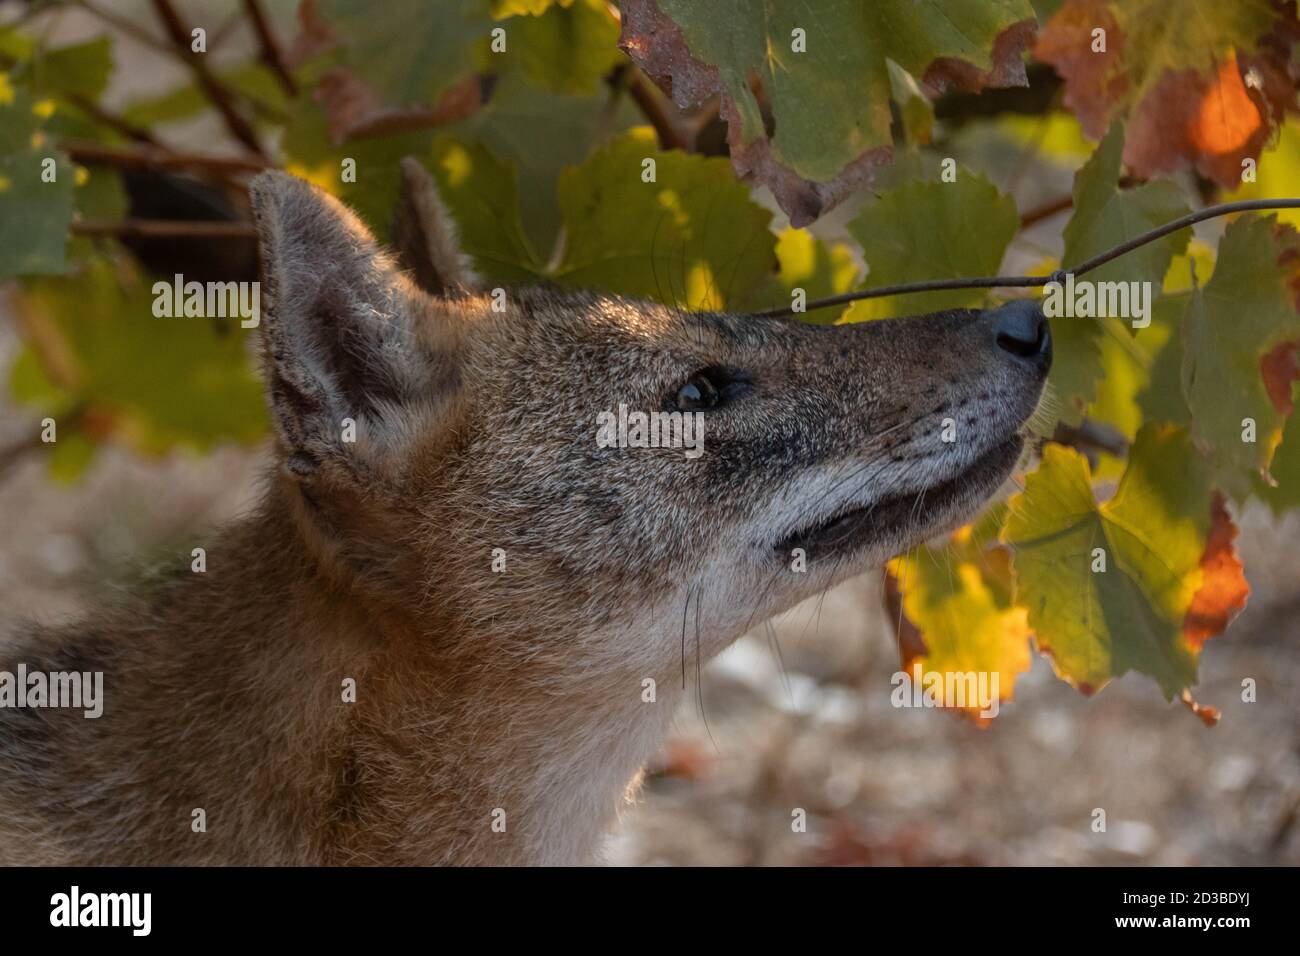 Golden jackal sniffing air side view close-up Stock Photo